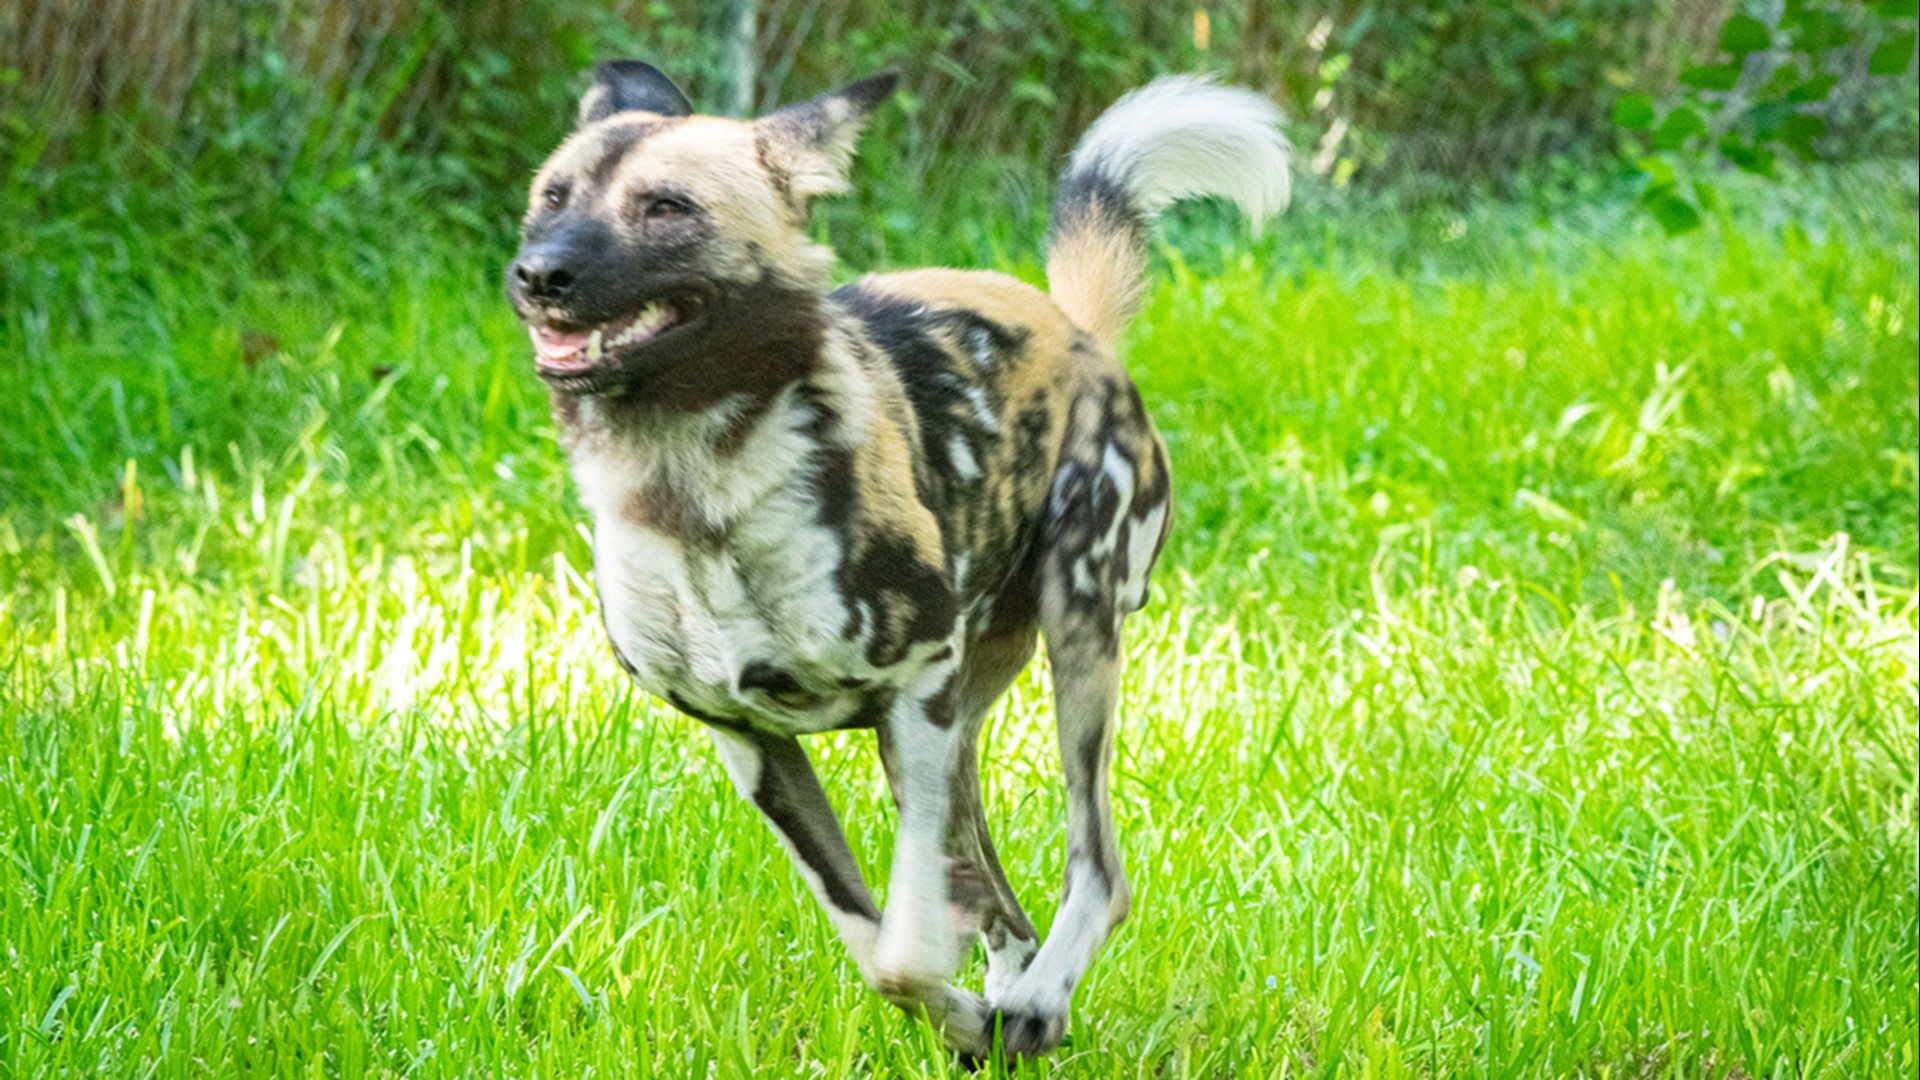 The Houston Zoo welcomed African painted dogs back after a three-year absence. The four male dogs are offspring of Ghost, a painted dog that once lived at the zoo.